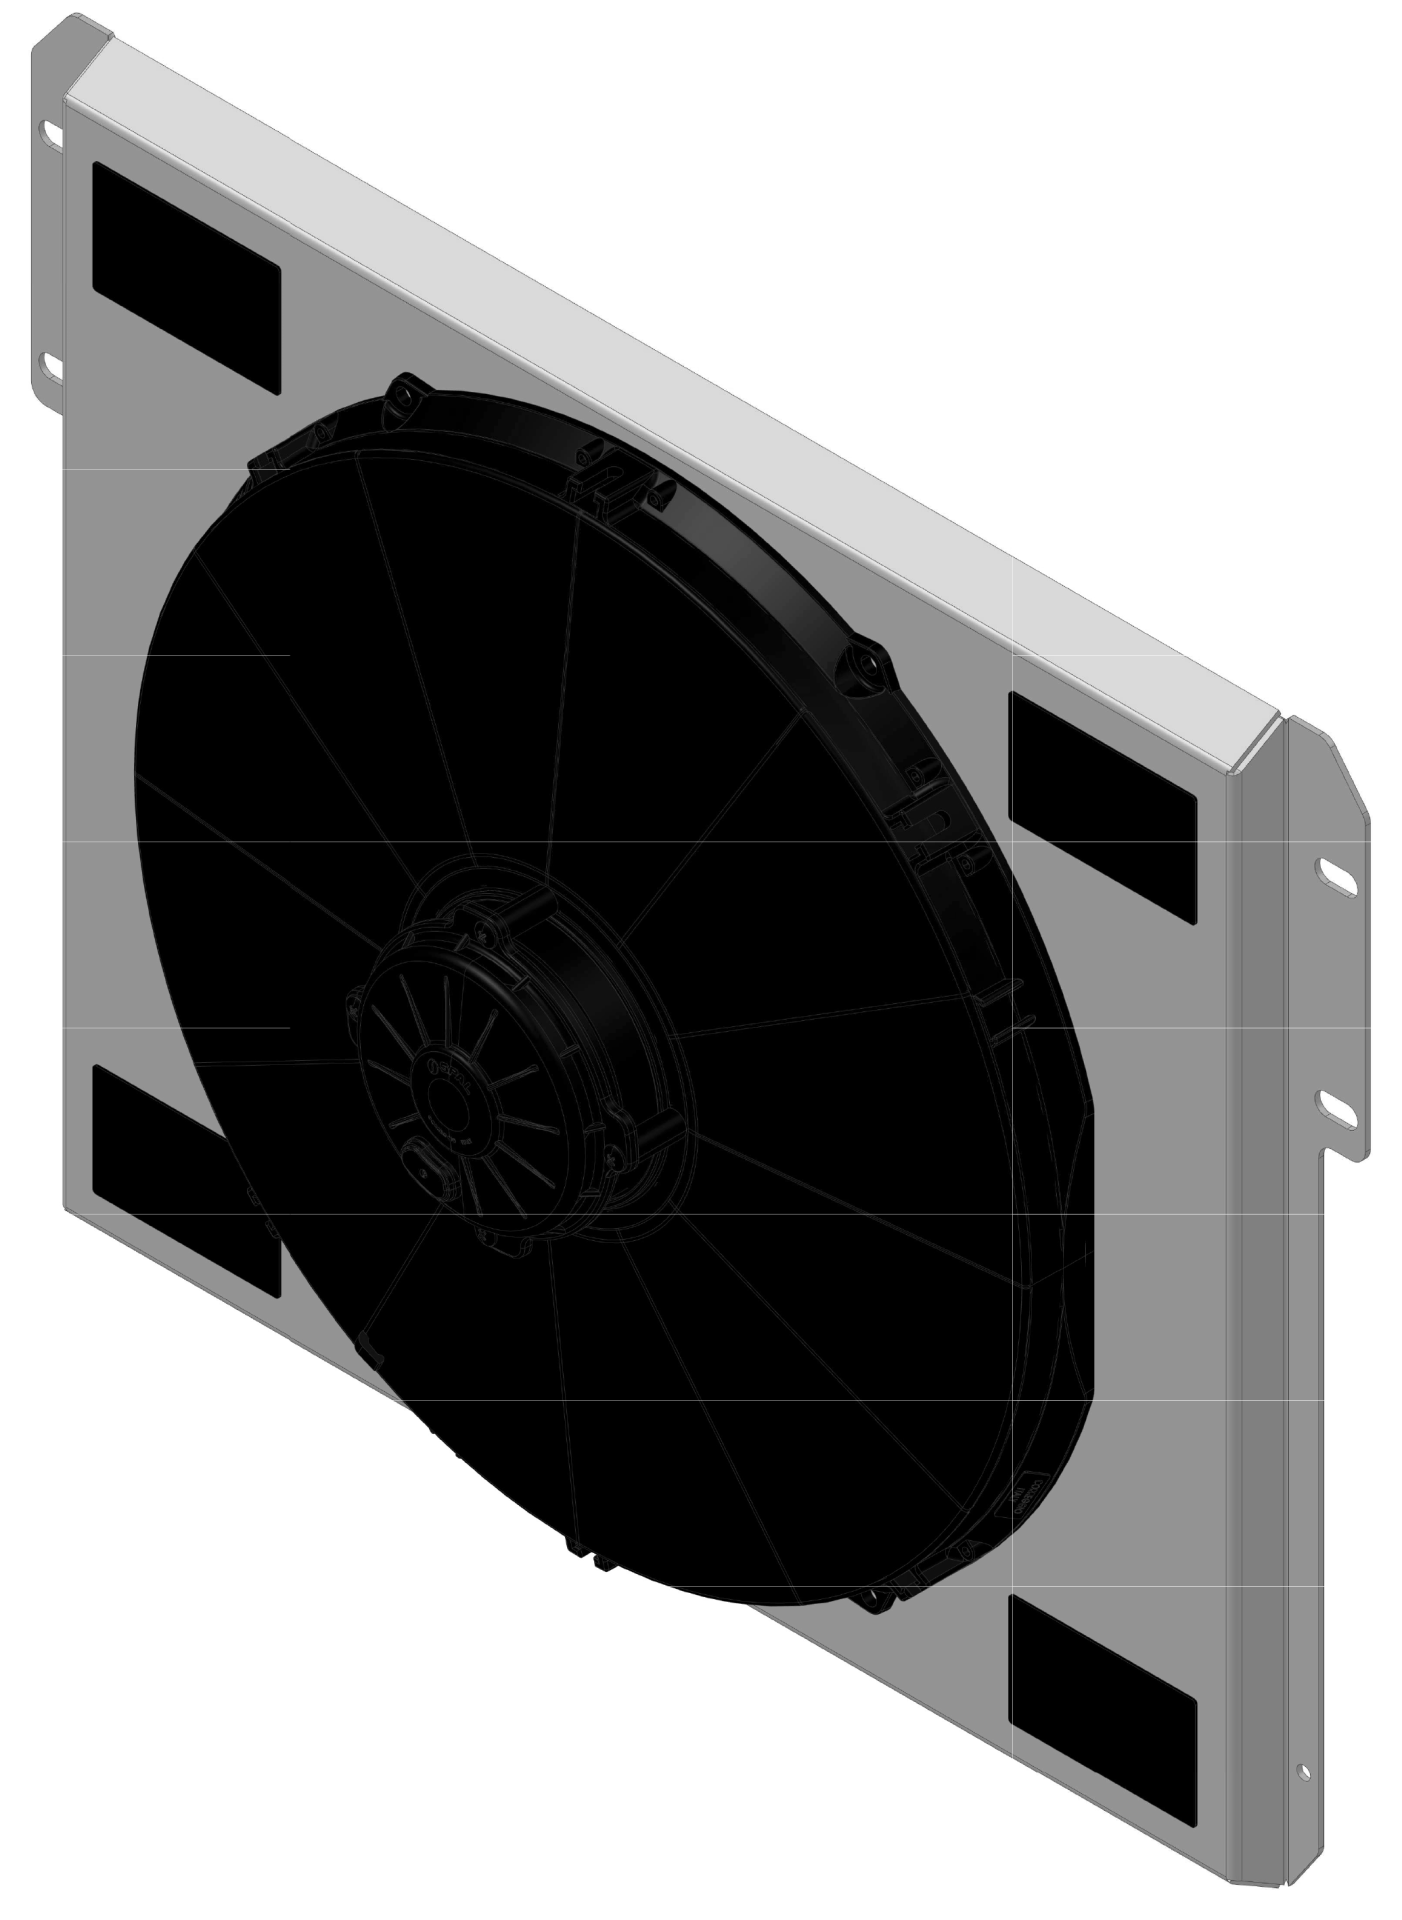 Wizard Cooling Inc - 1955-1957 Ford Thunderbird- Shroud Mounted Fan - Low Profile